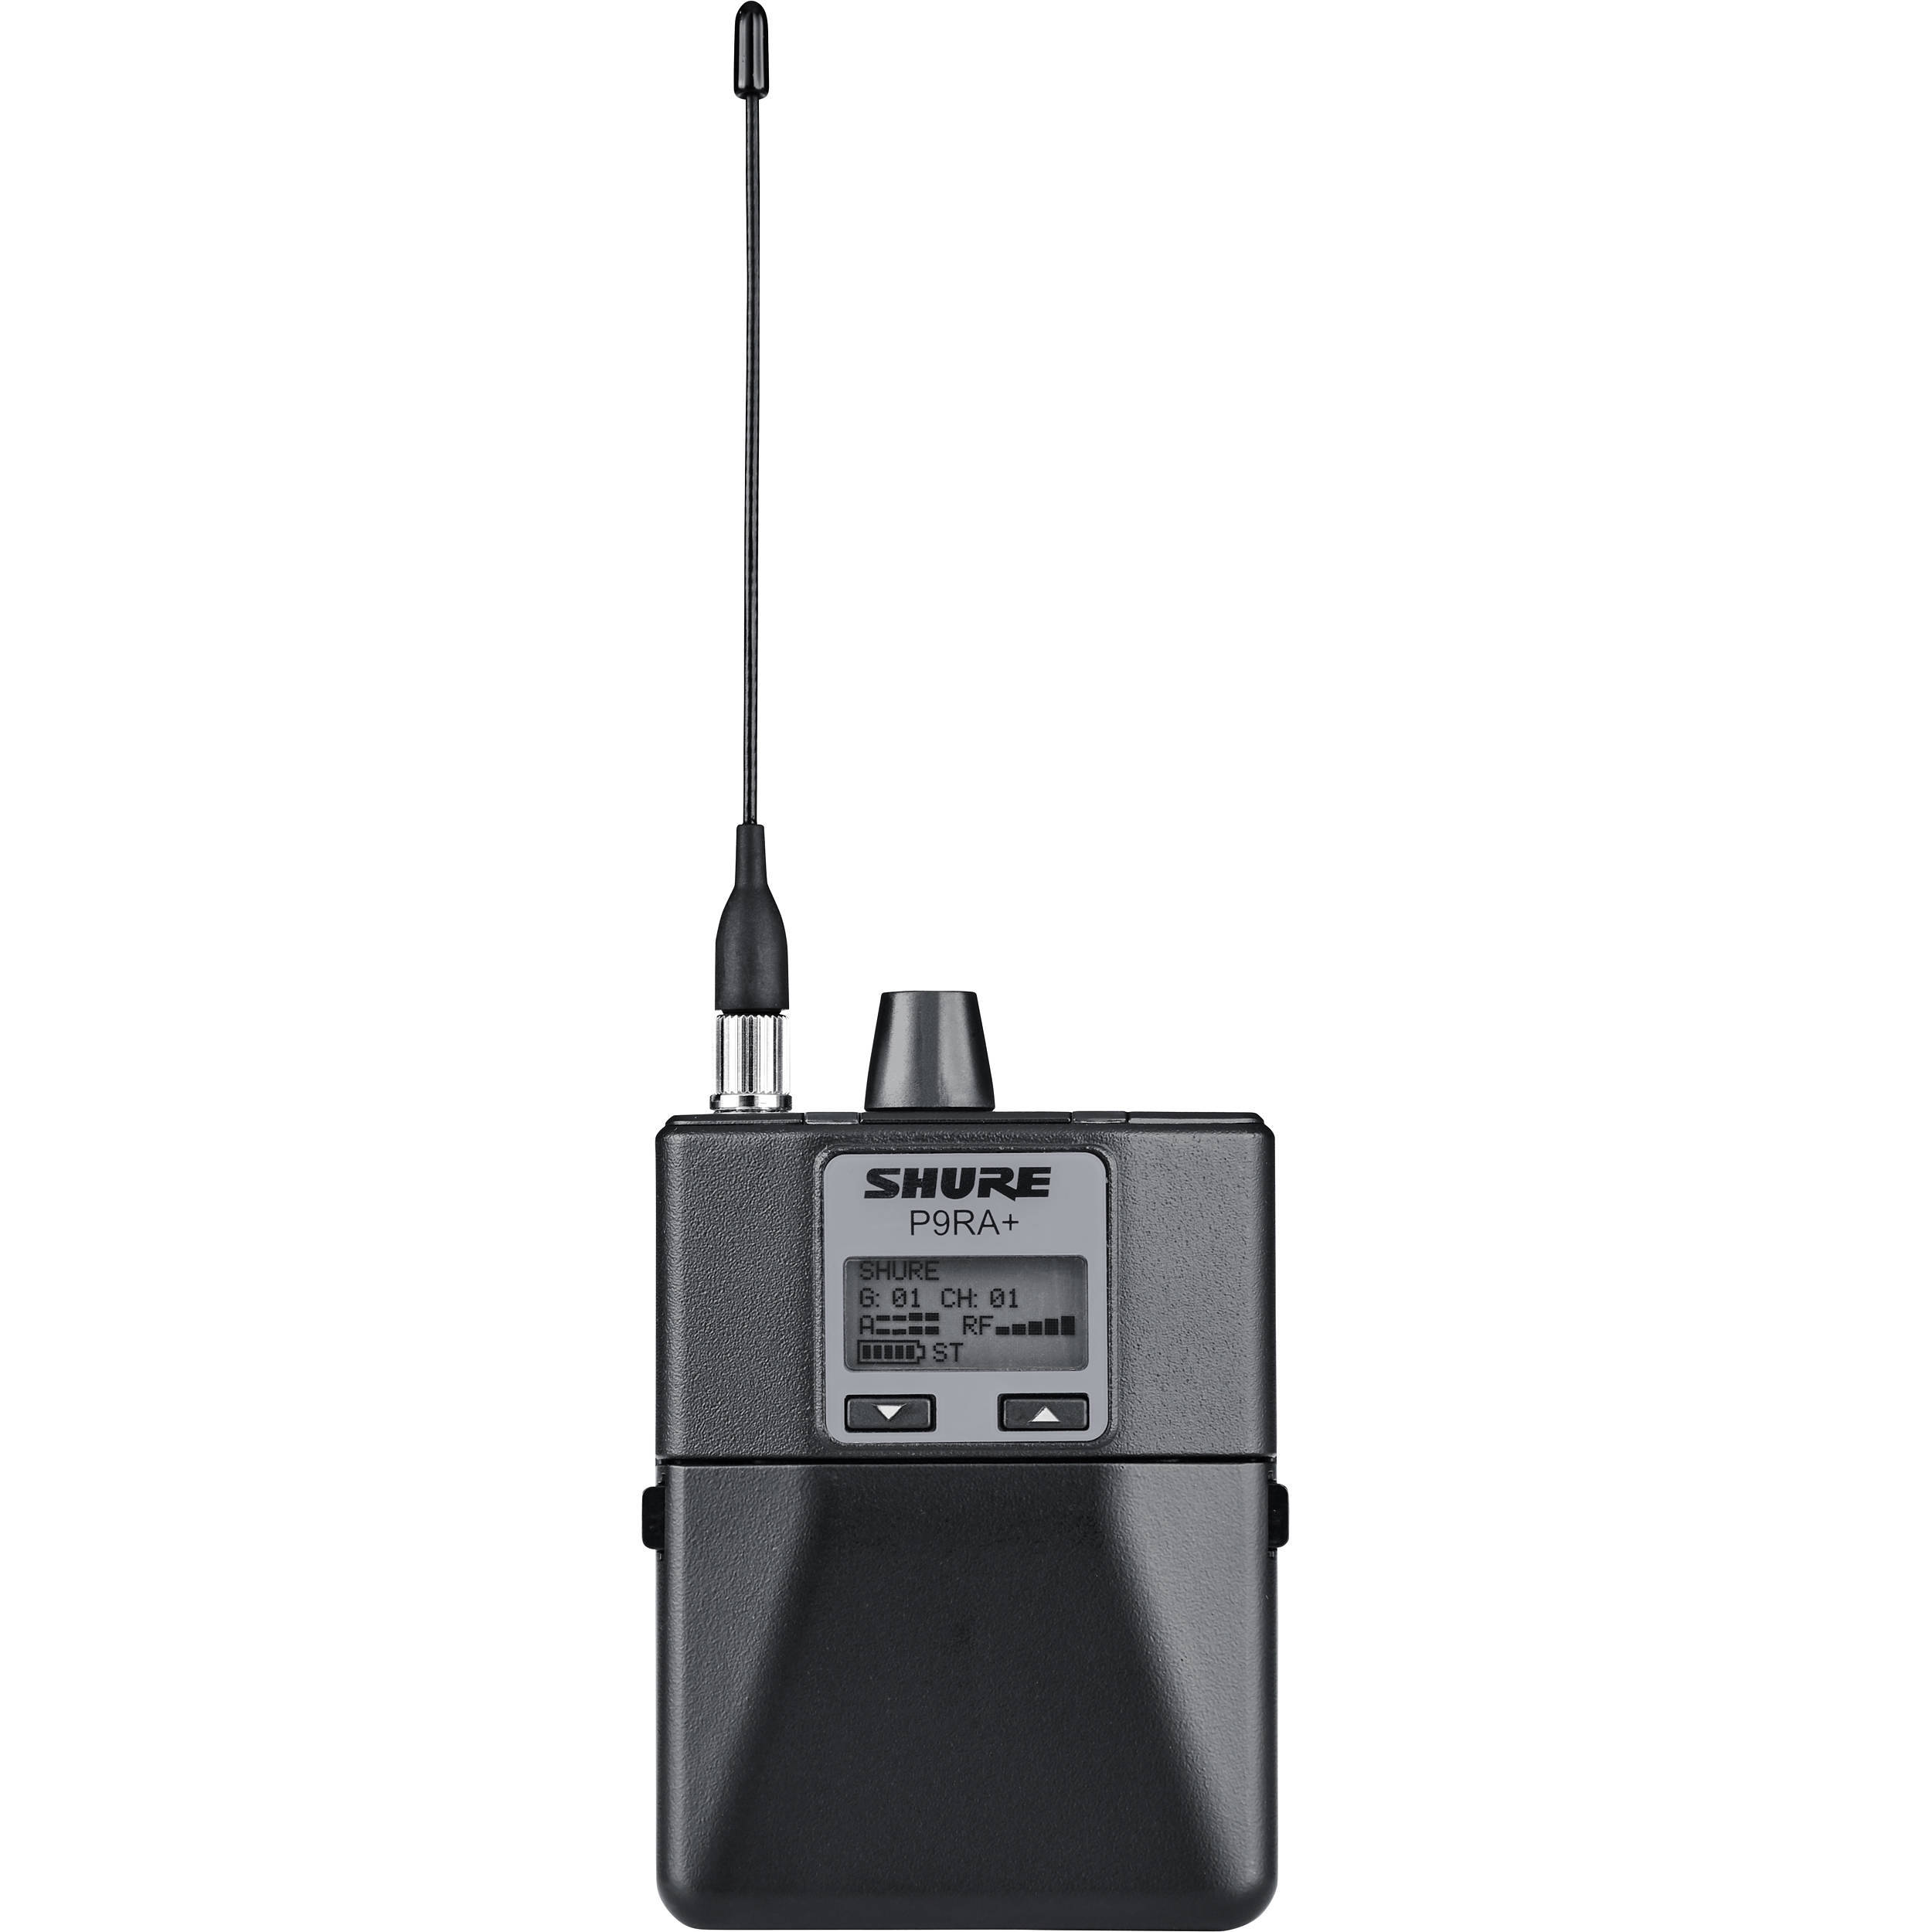 Shure P9ra Wireless Bodypack Receiver For Psm 900 P9ra X55 B H